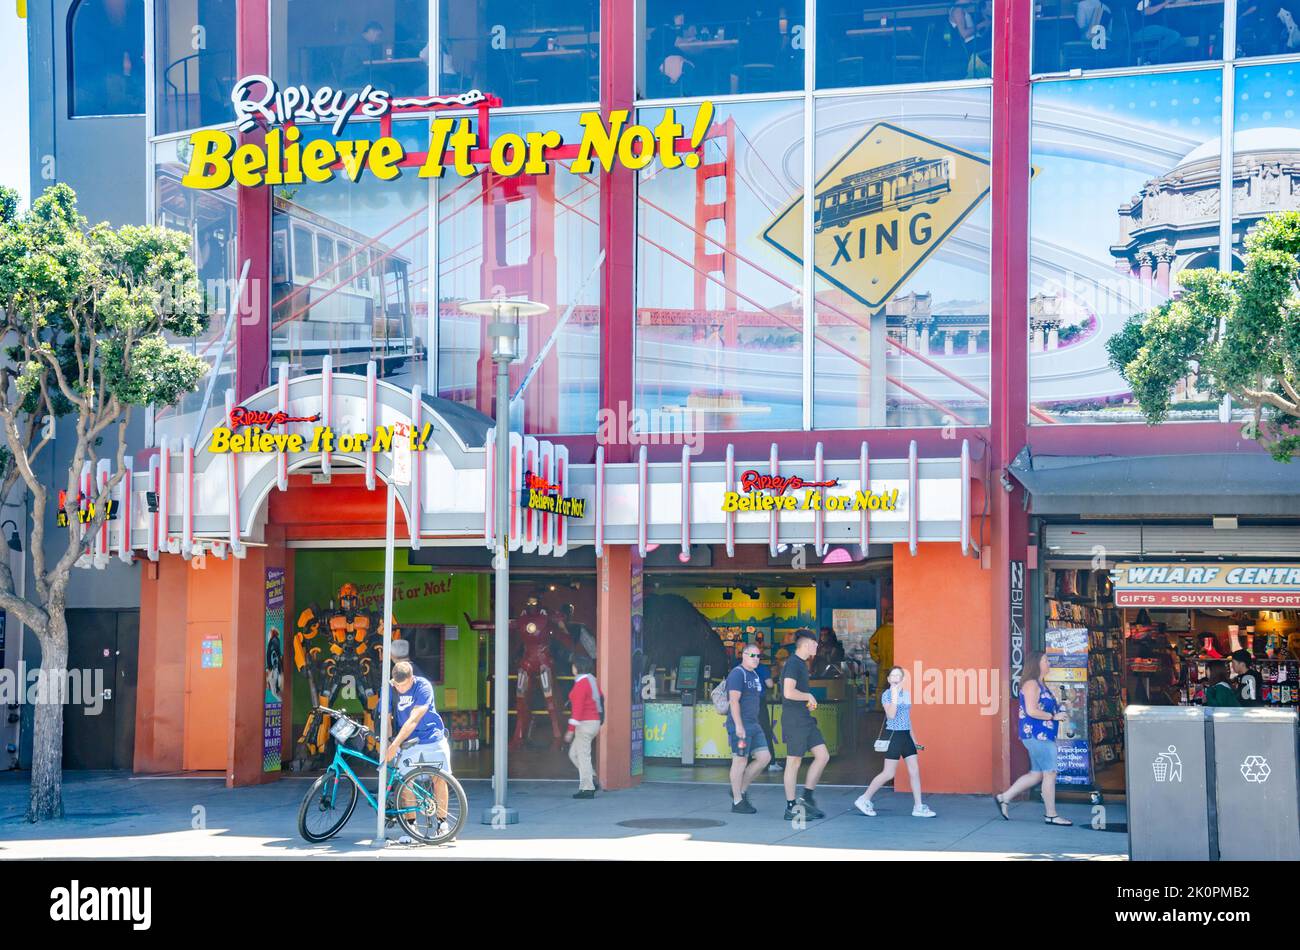 Front of the Ripley's Believe it or Not museum on Jefferson Street in an Francisco, California Stock Photo